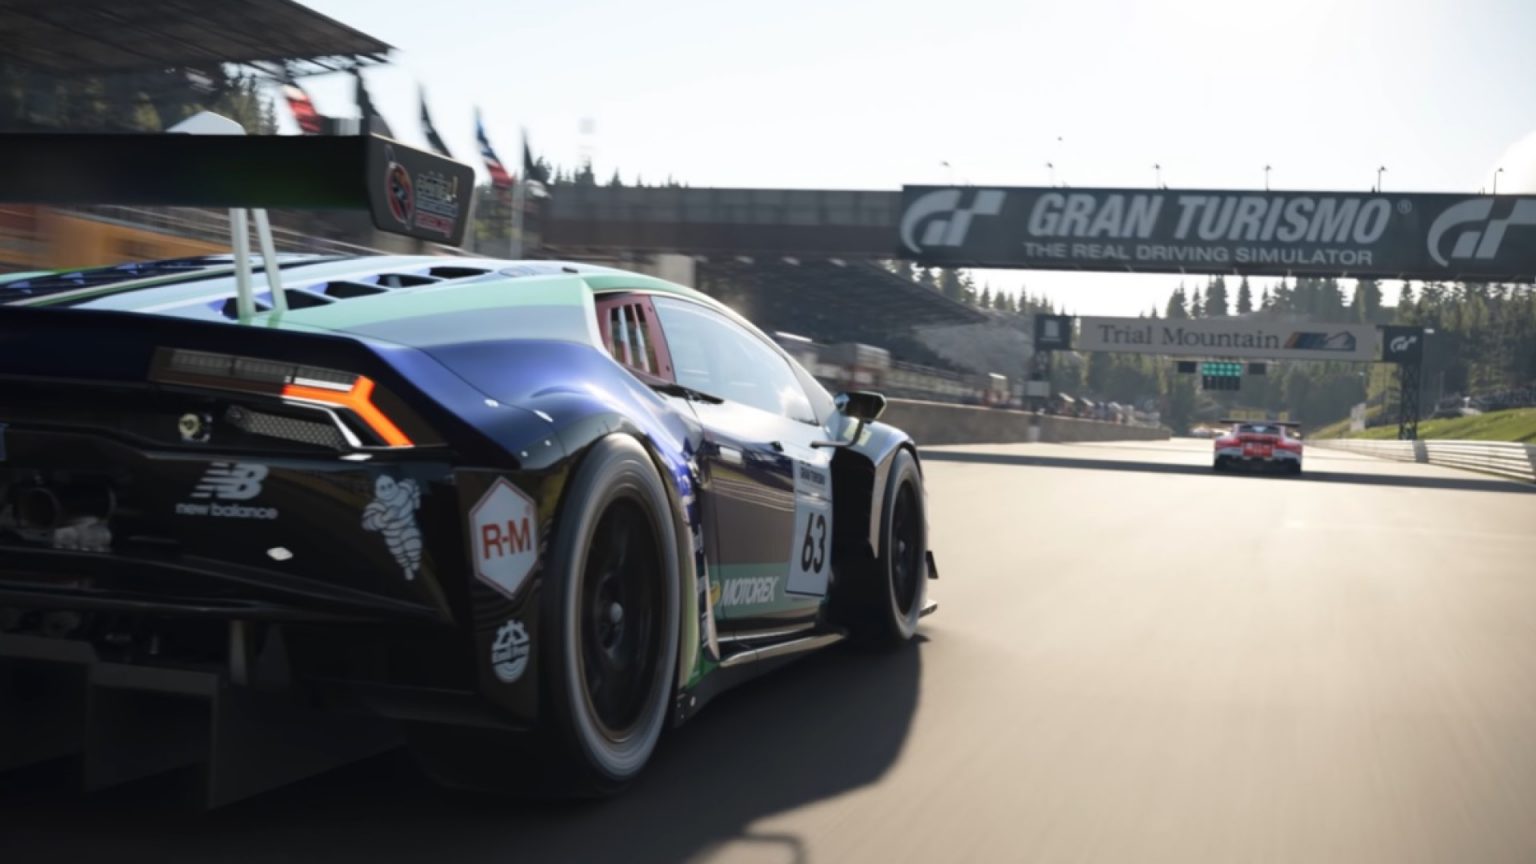 In early August, Gran Turismo 7 will receive four new cars, - says the producer of the series